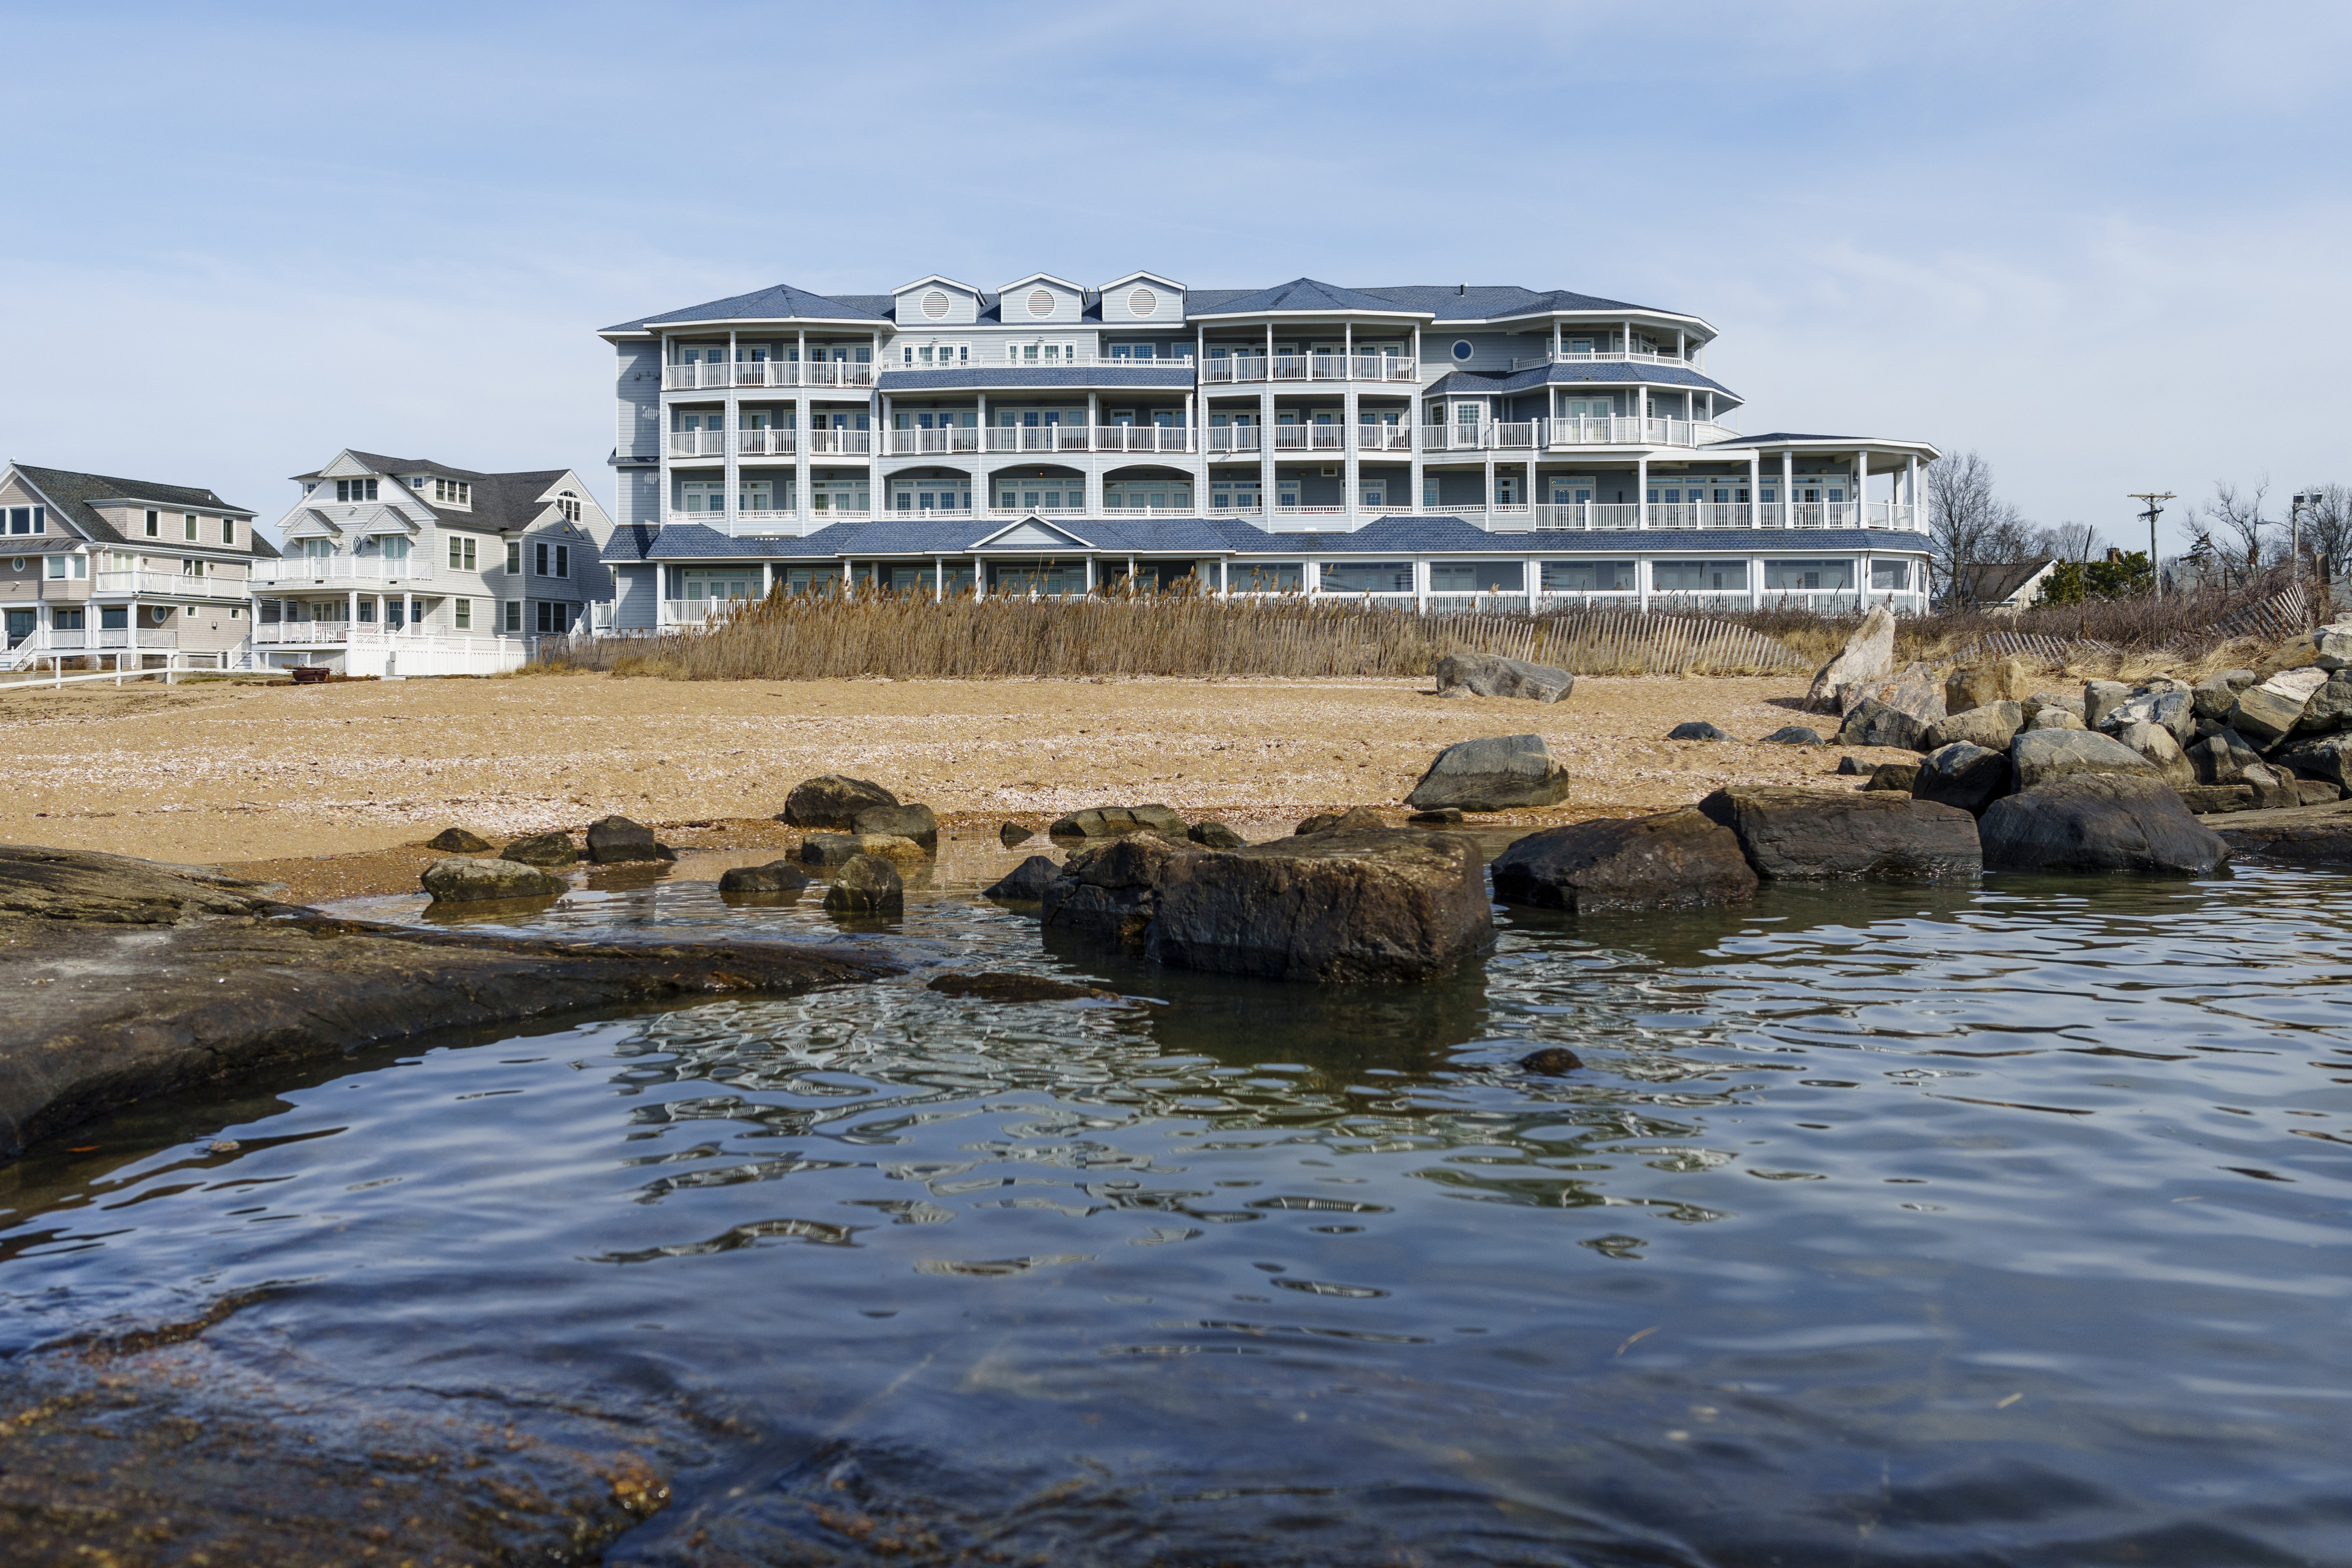 Hotel exterior with beach in foreground